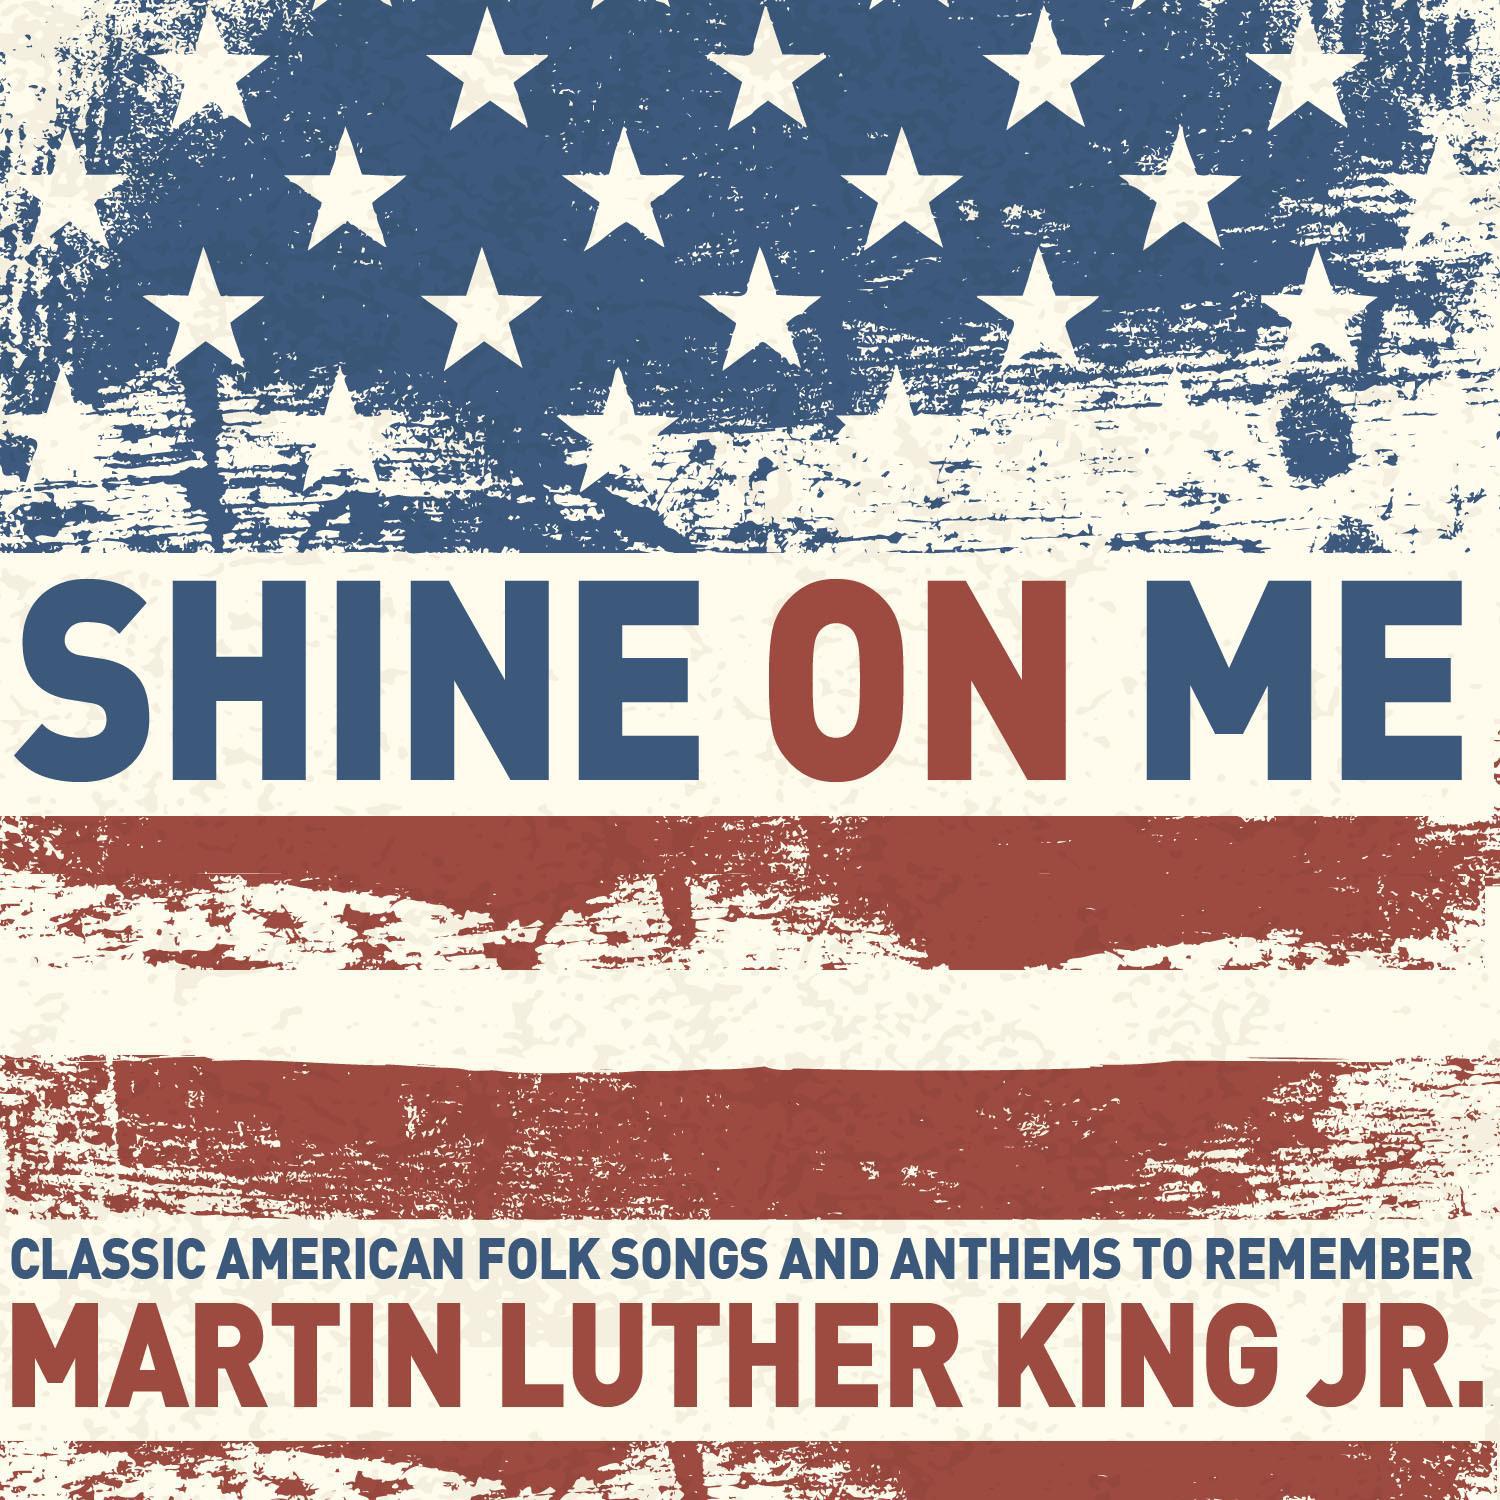 Shine on Me - Classic American Folk Songs and Anthems to Remember Martin Luther King Jr. with Lead Belly, The Carter Family, The Us Army Band, And More!